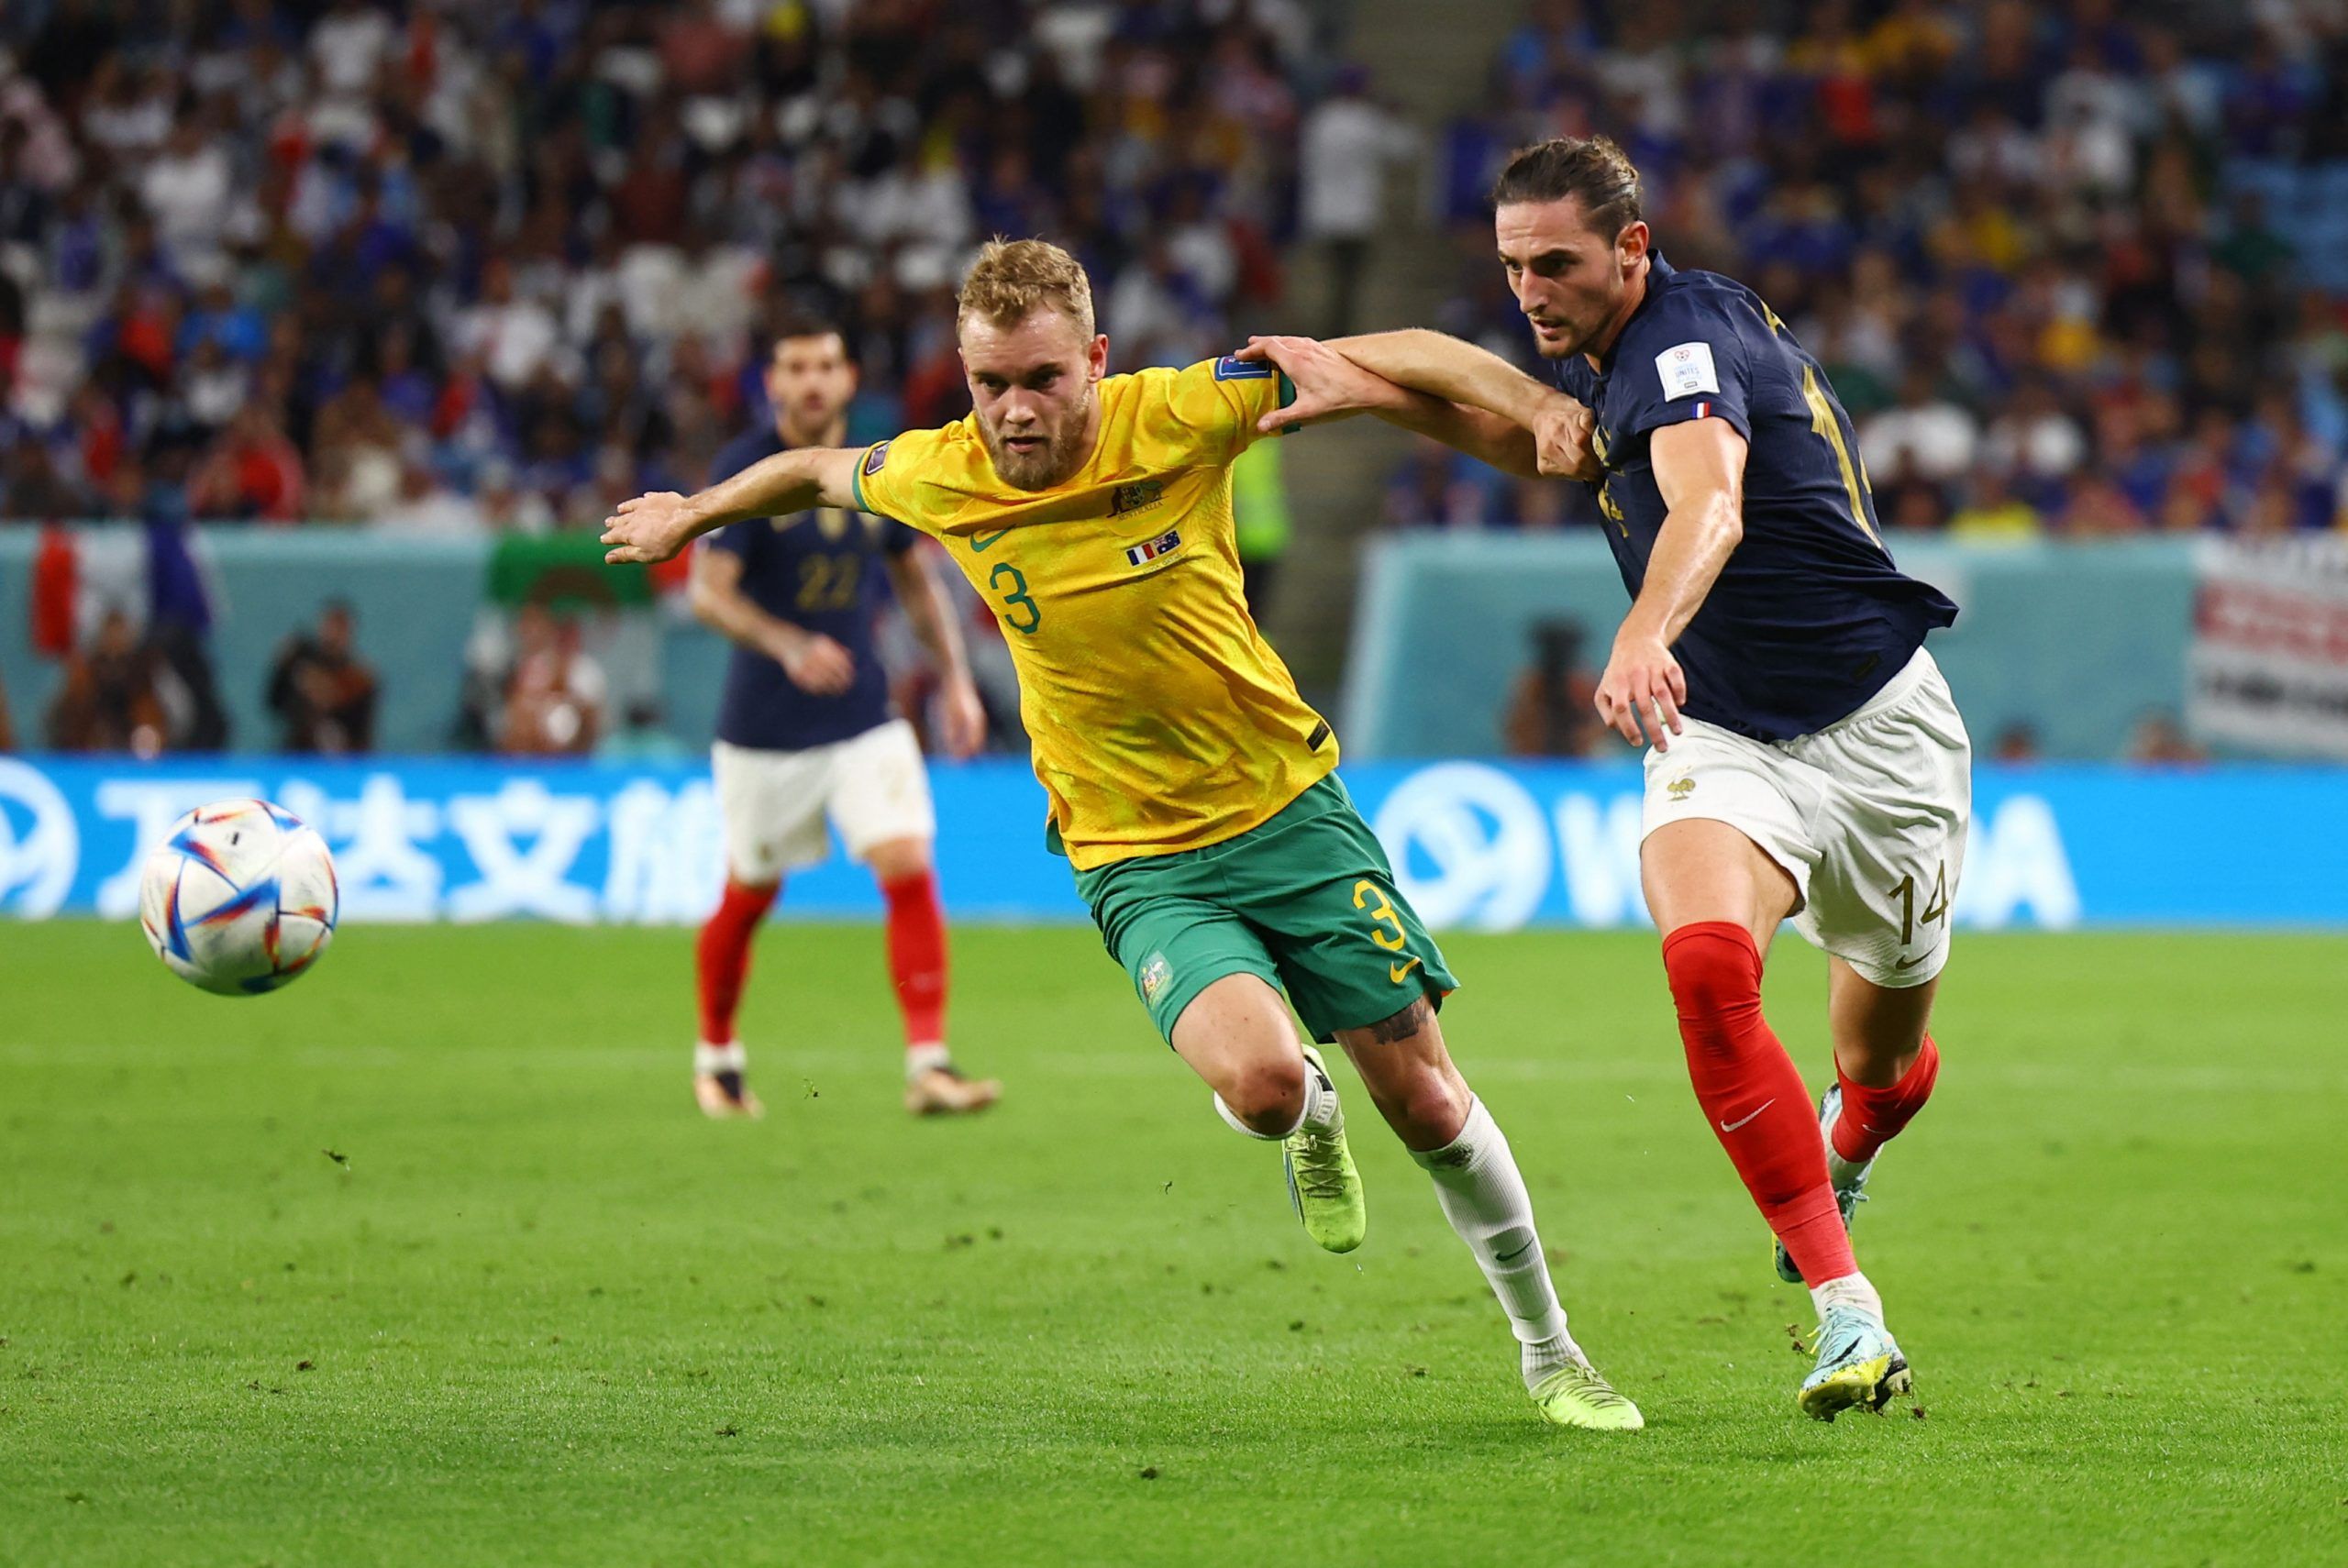 Australia's Nathaniel Atkinson in action with France's Adrien Rabiot